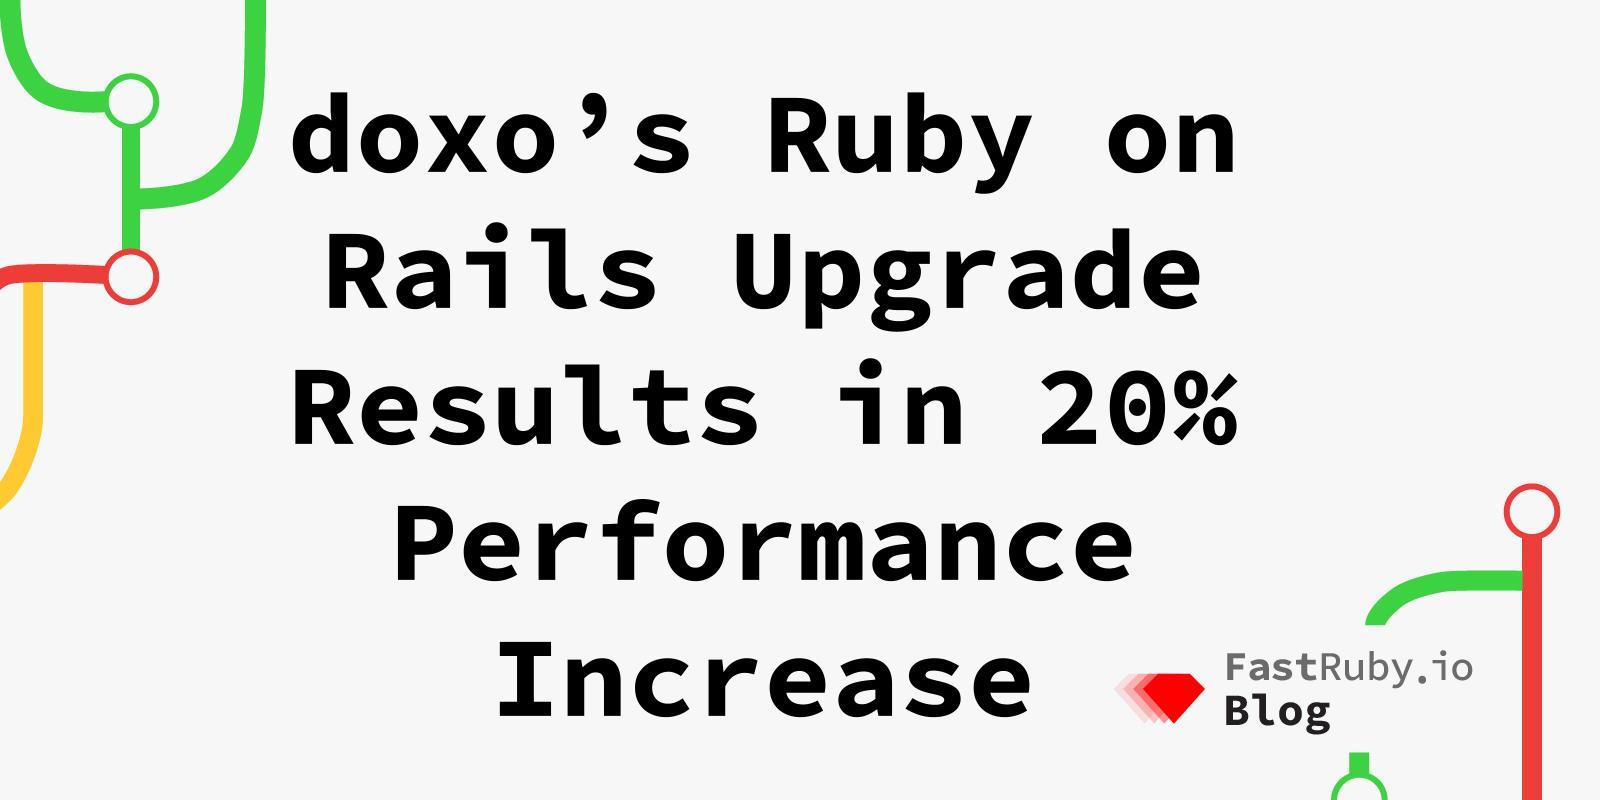 doxo’s Ruby on Rails Upgrade Results in 20% Performance Increase